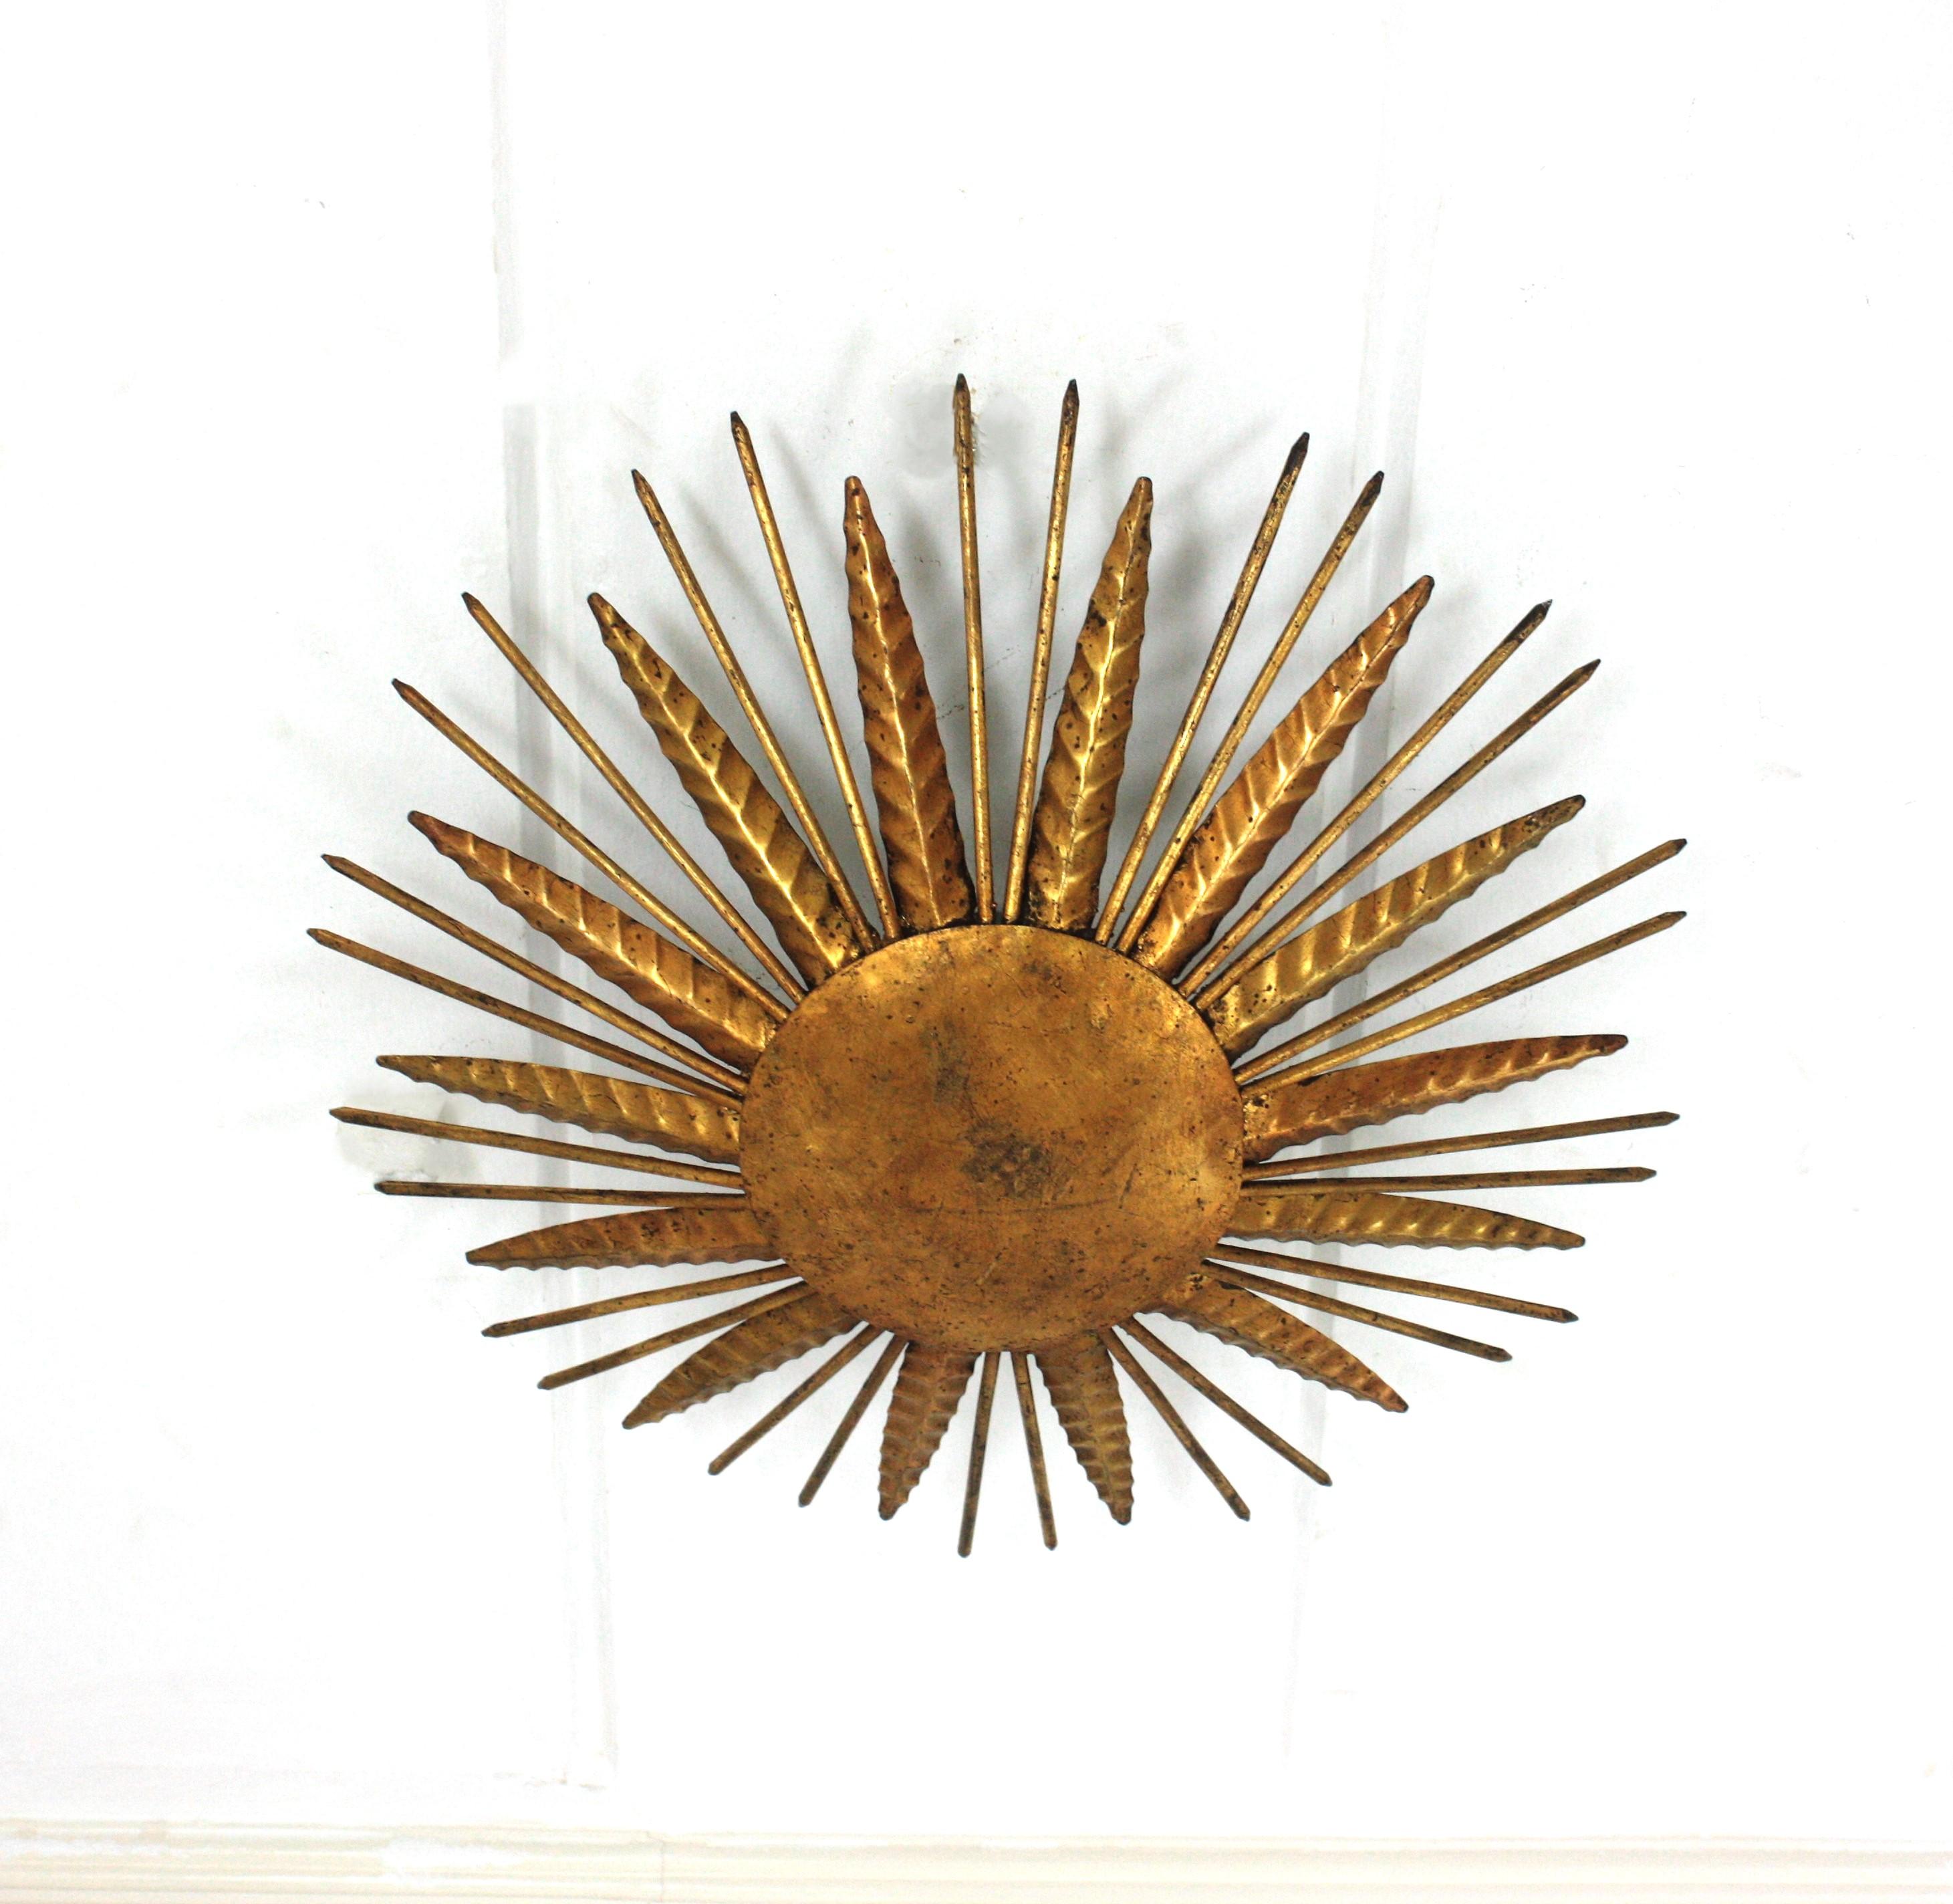 Hand-Crafted French Sunburst Spikey Light Fixture in Gilt Iron, 1940s For Sale